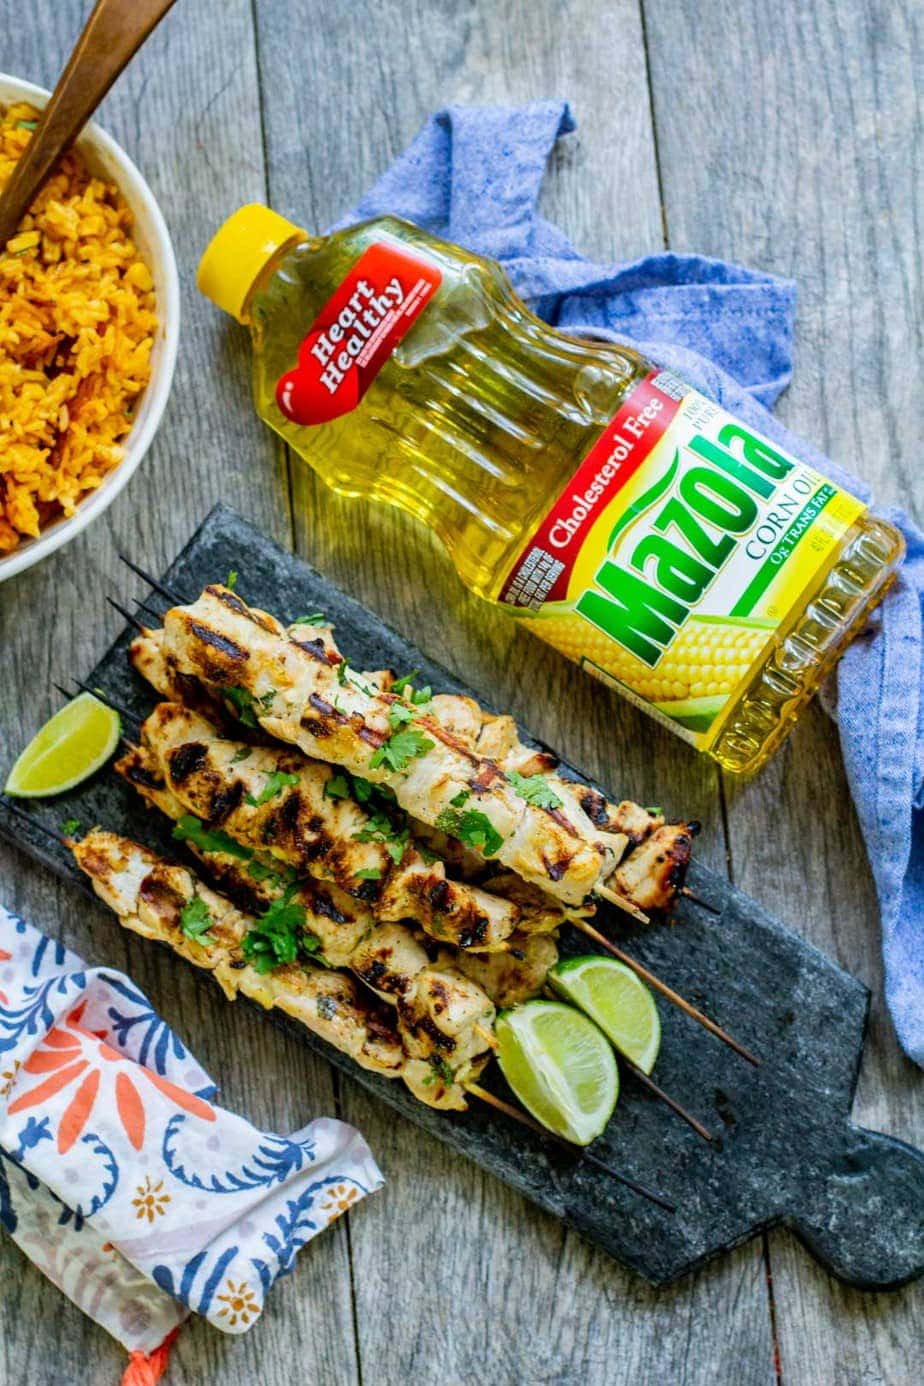 Cilantro-Lime Pineapple Chicken Skewers - Recipe from Price Chopper